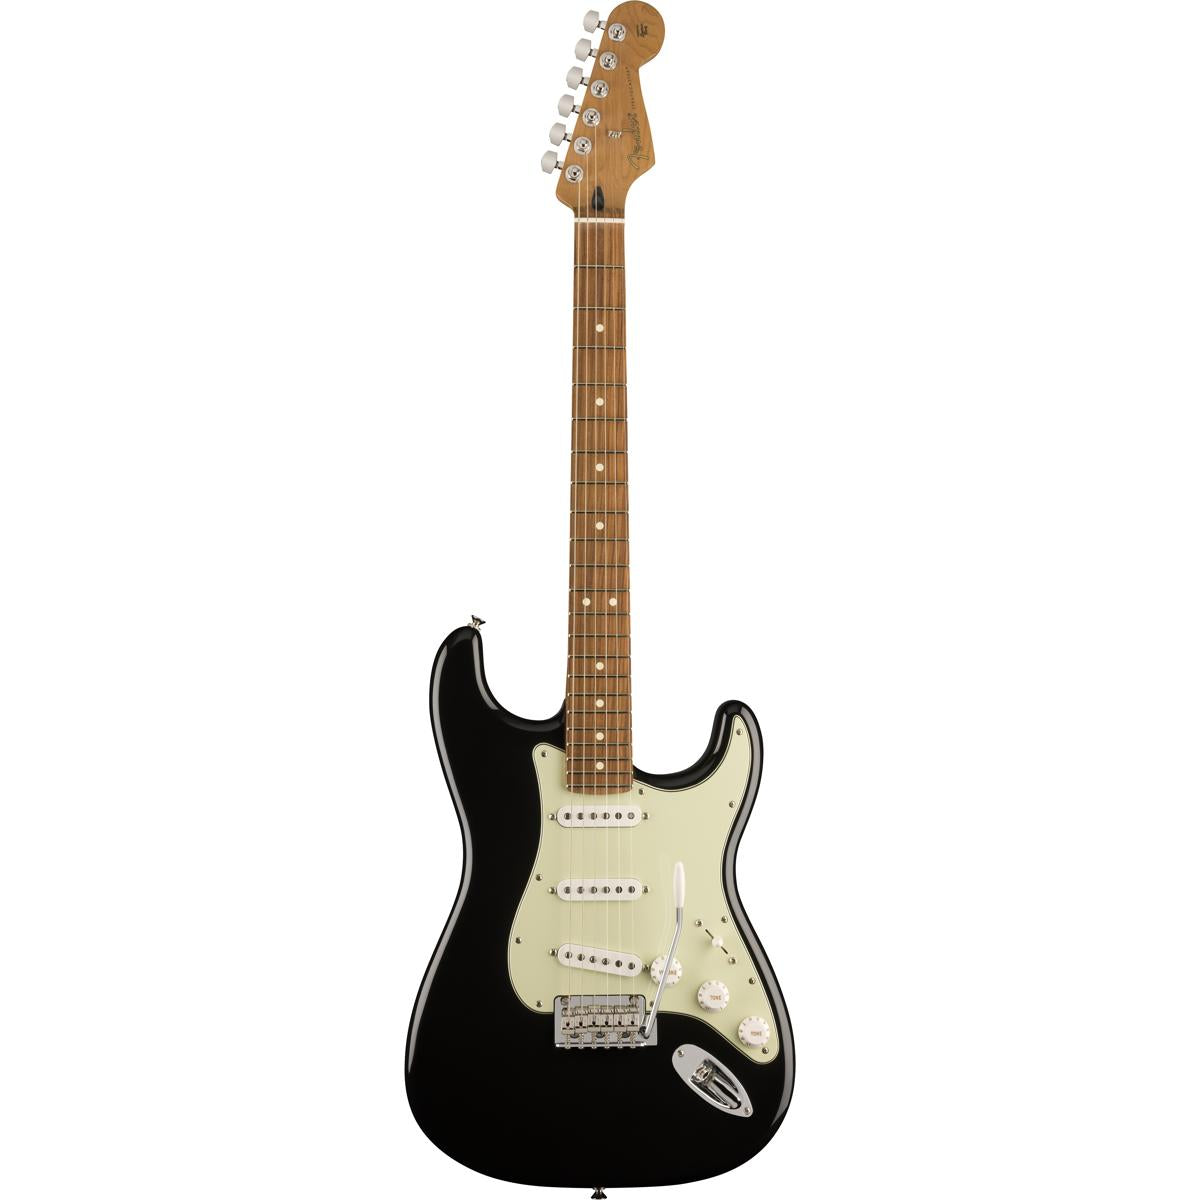 Fender Limited Edition Player Stratocaster Electric Guitar PF Black w/ CS Pickups - MIM 0144593506